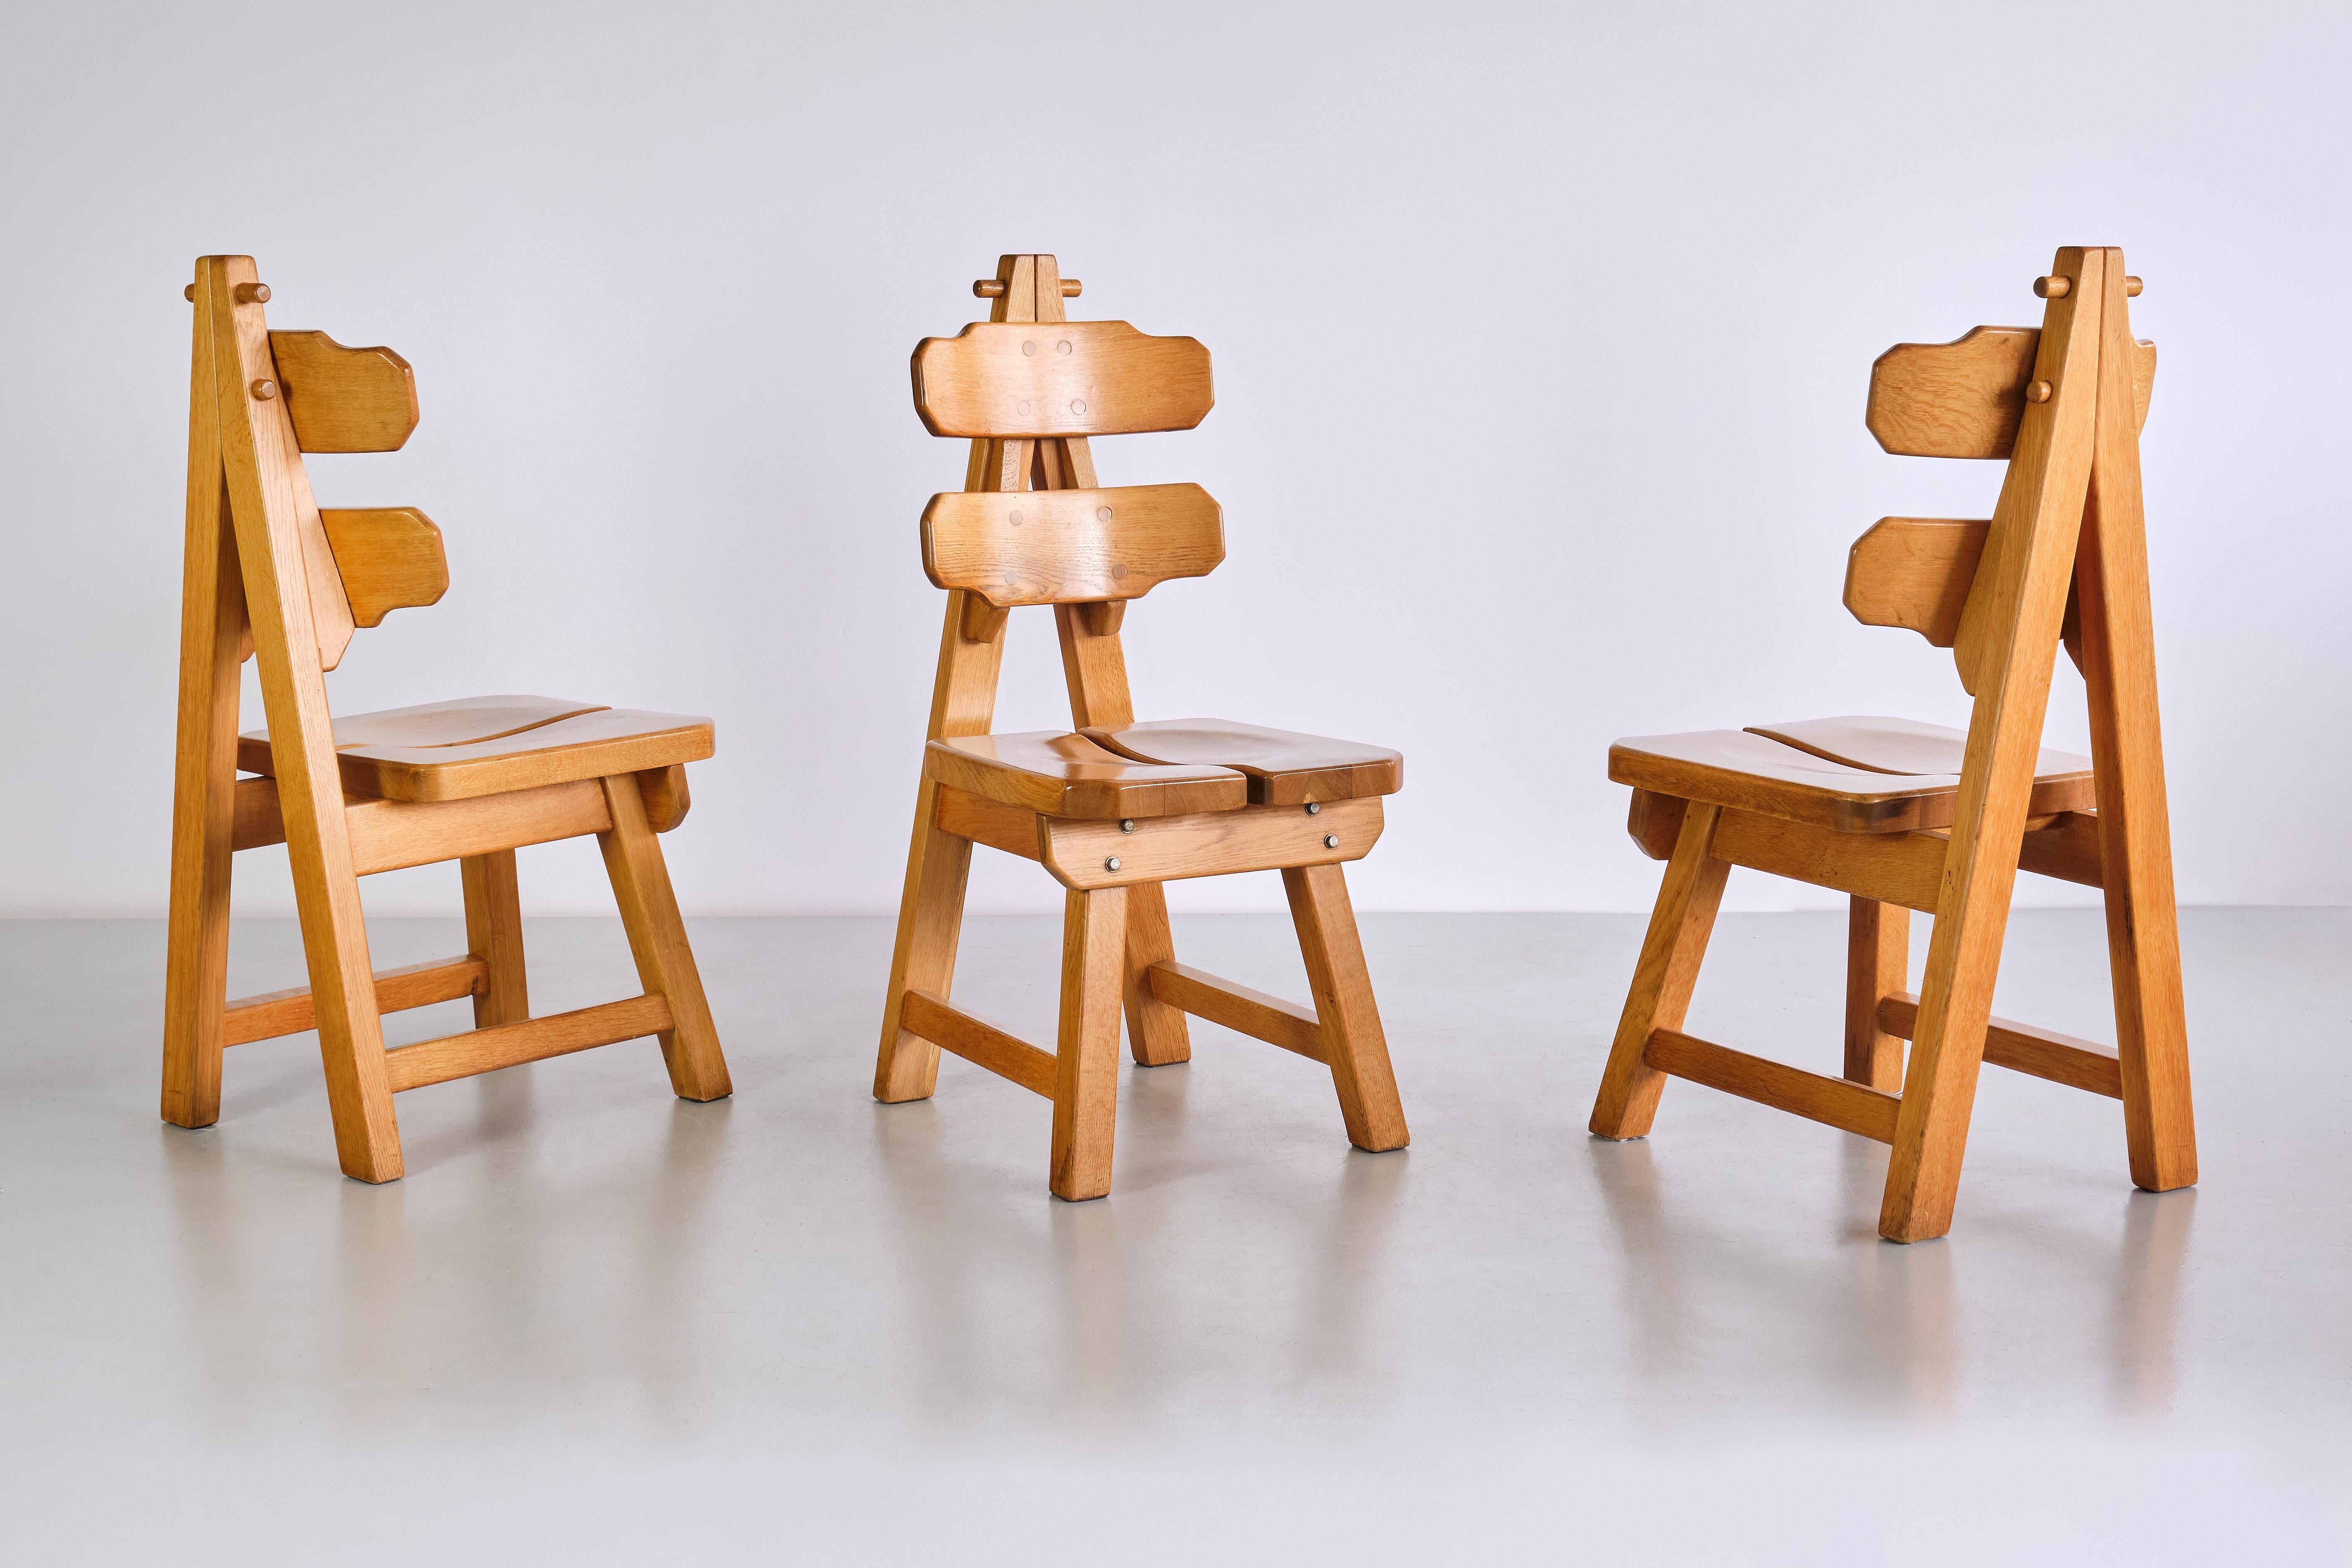 Sculptural Set of Six Brutalist Dining Chairs in Solid Oak, France, 1960s For Sale 1